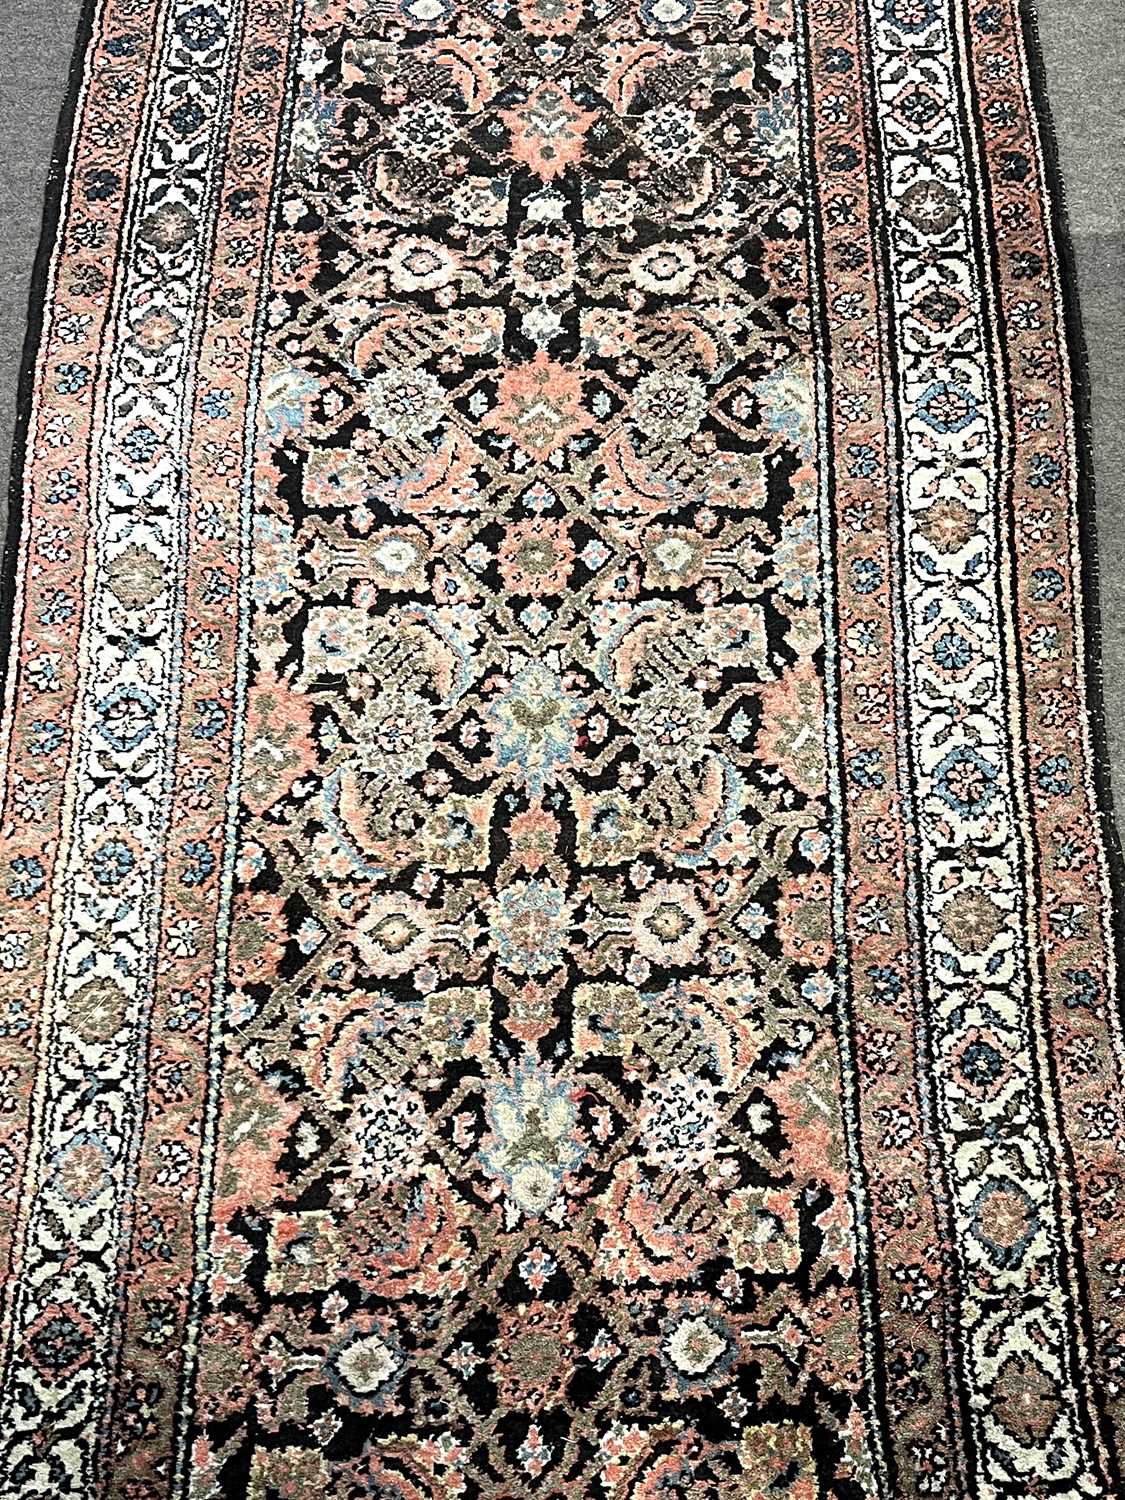 Persian runner carpet with floral pattern 395cm x 98 cm - Image 2 of 4